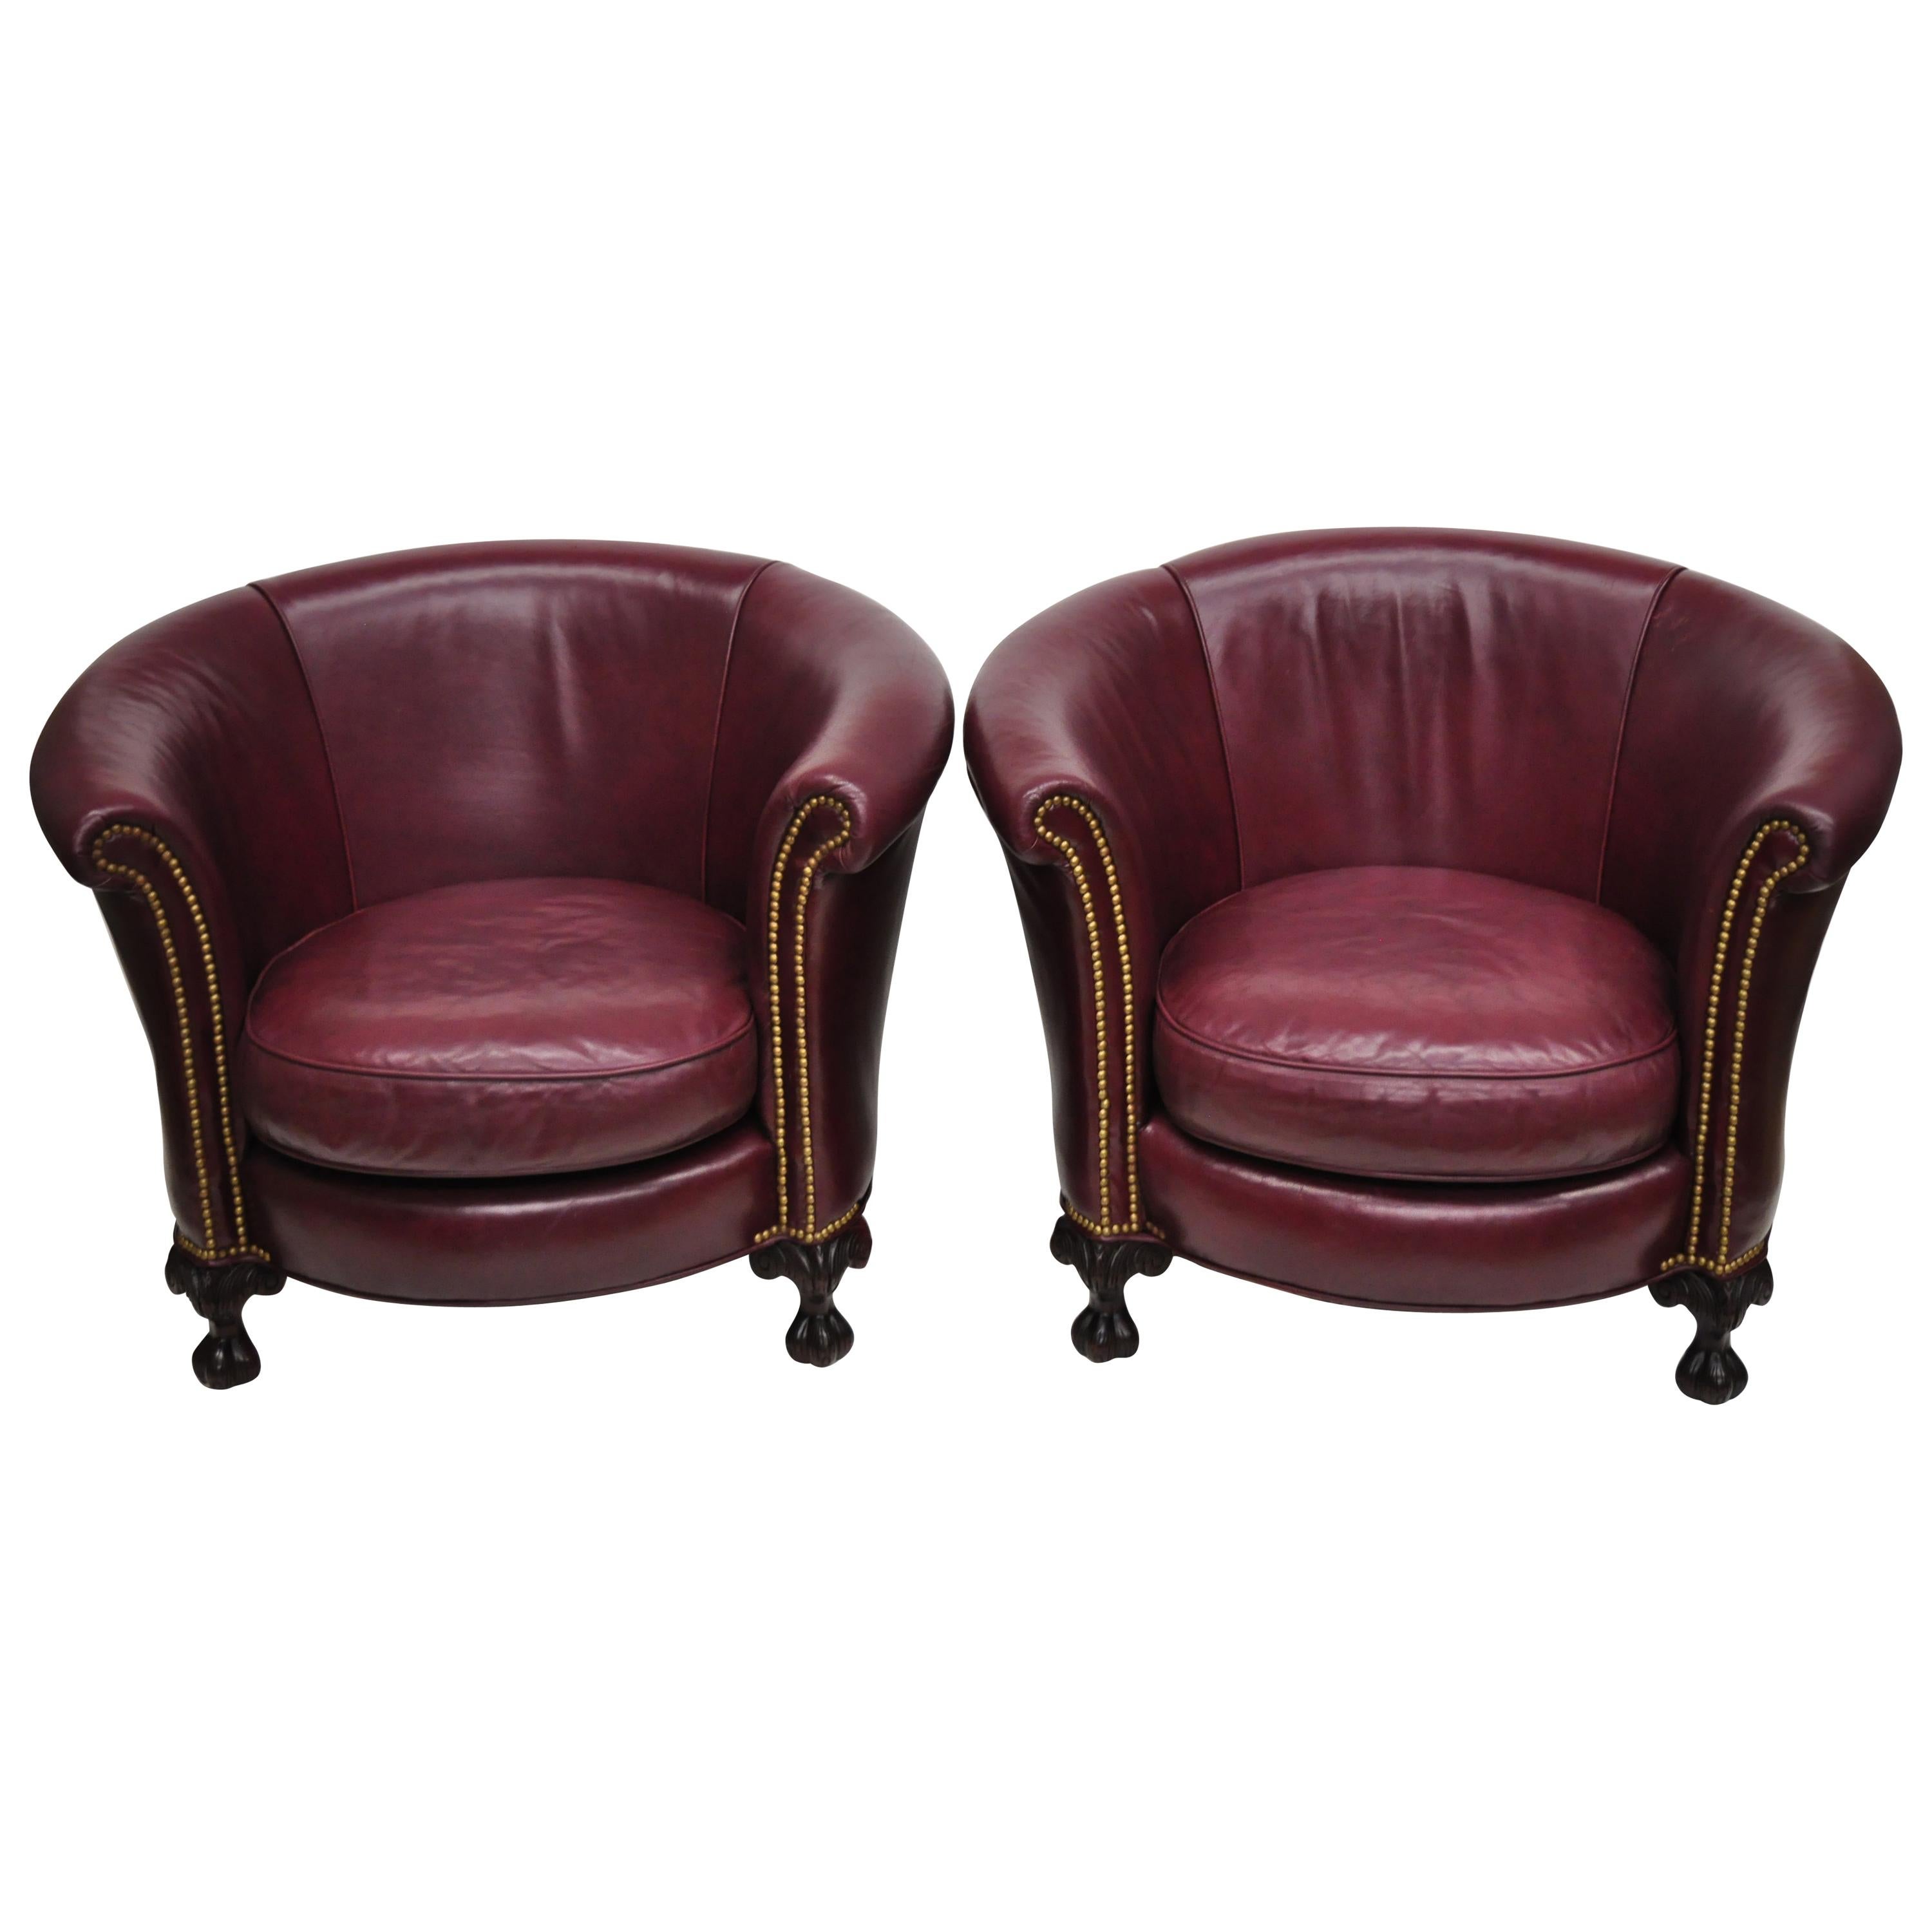 Old Hickory Tannery Burgundy Leder Ball & Claw Runde Club Lounge Stühle:: Paar